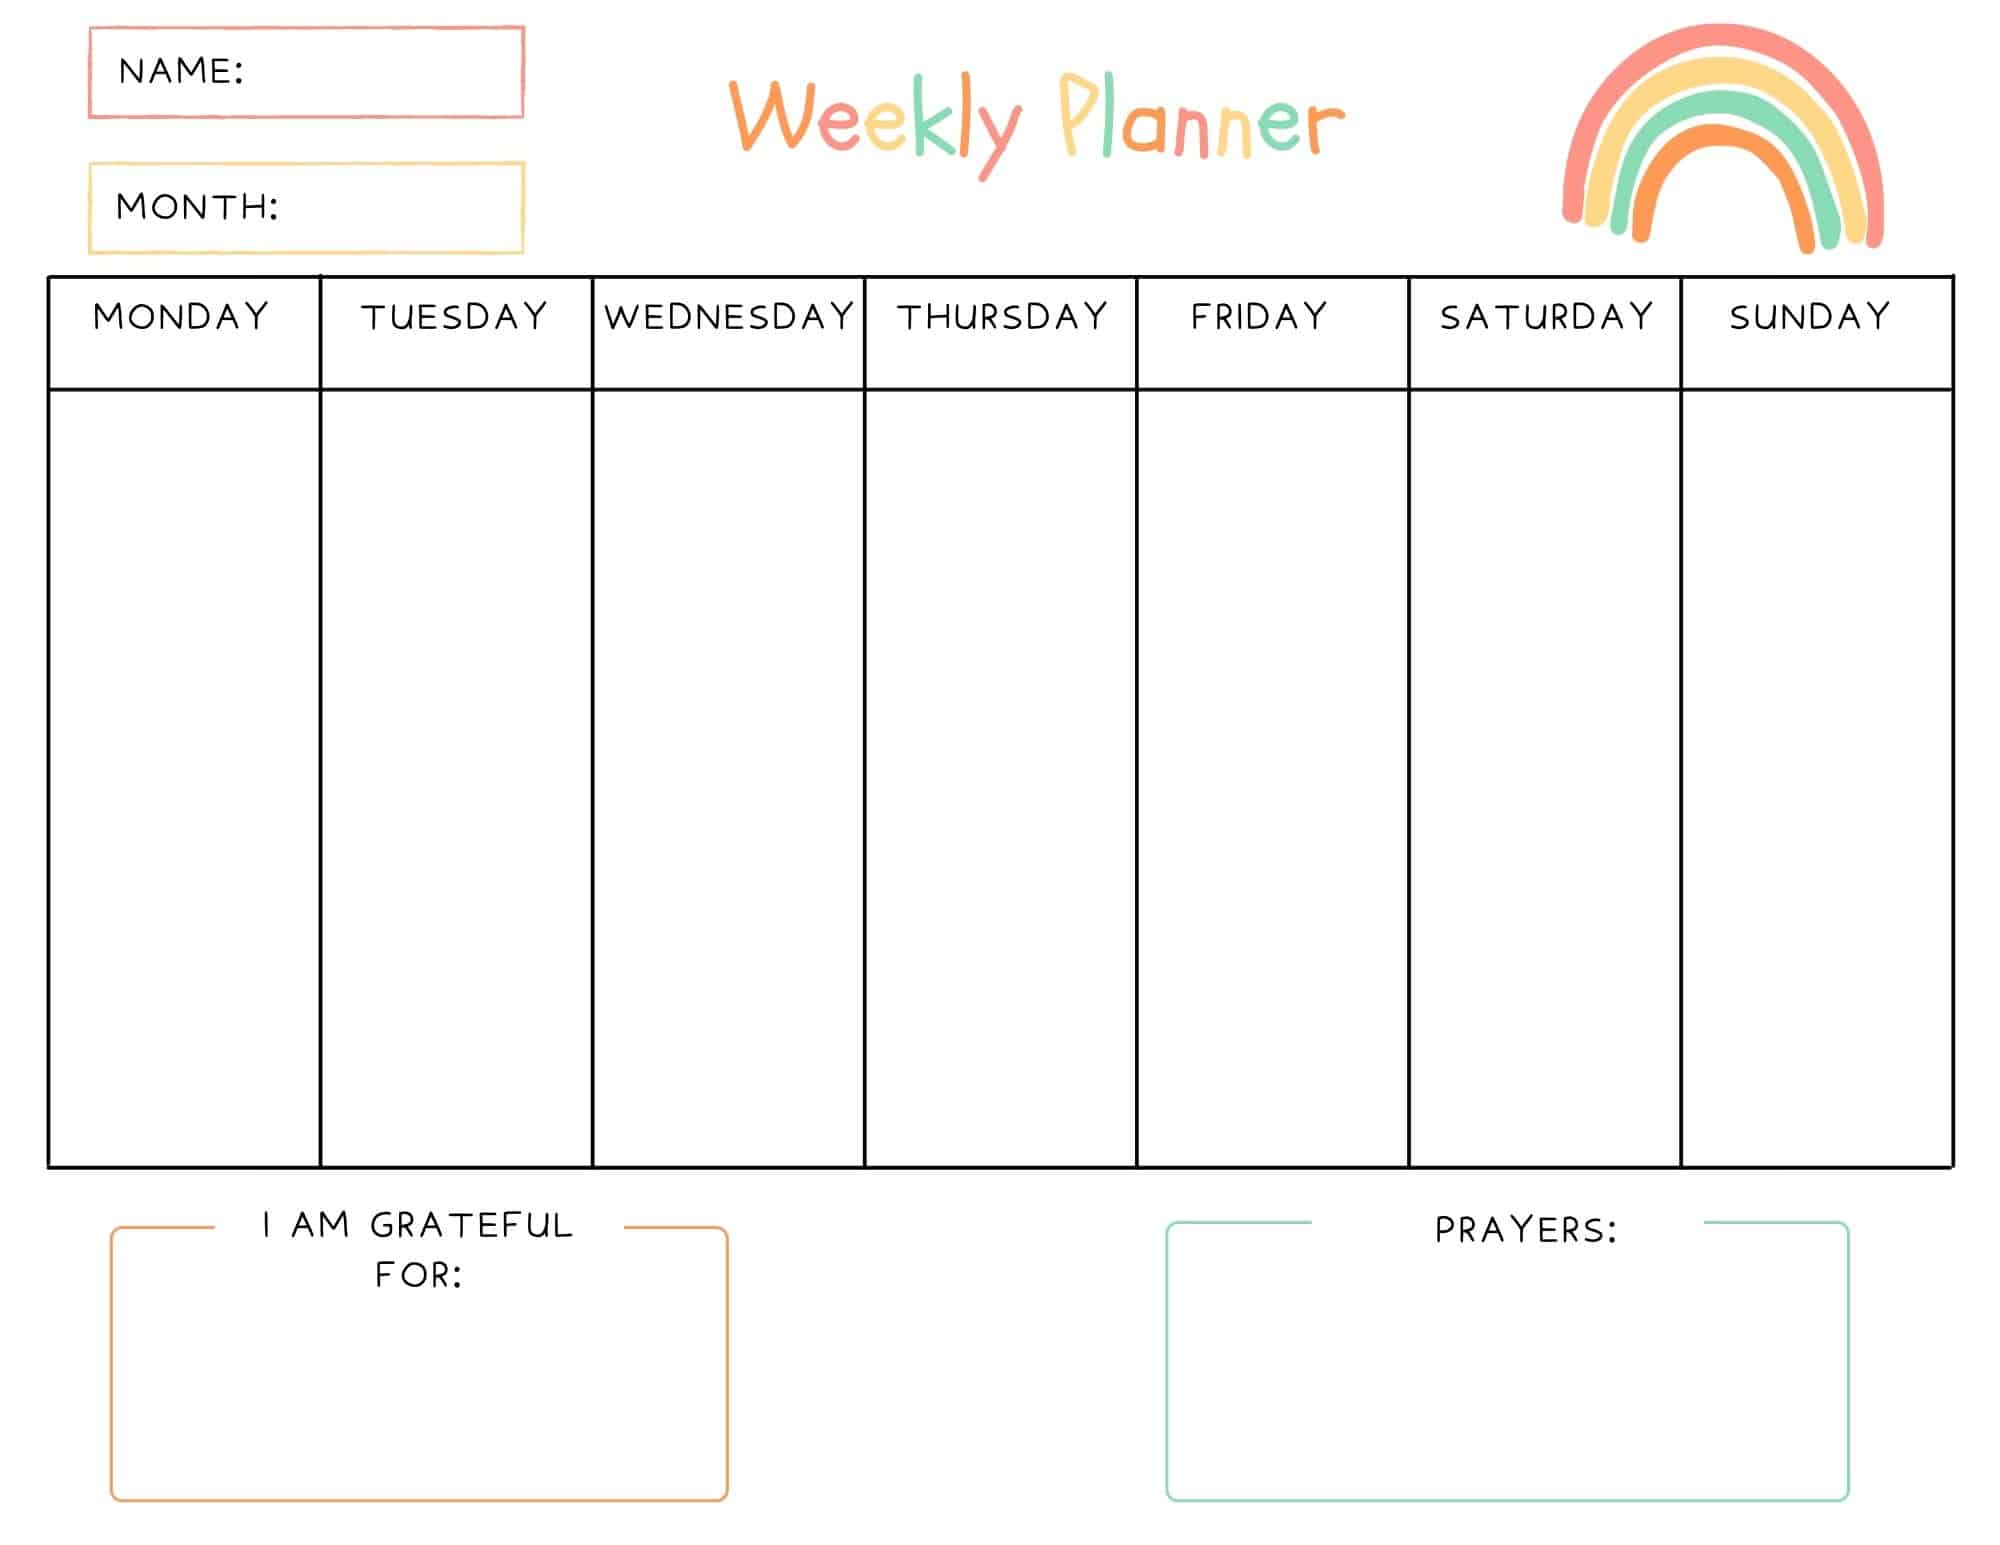 free-weekly-planner-for-kids-with-prayers-gratitude-out-upon-the-waters